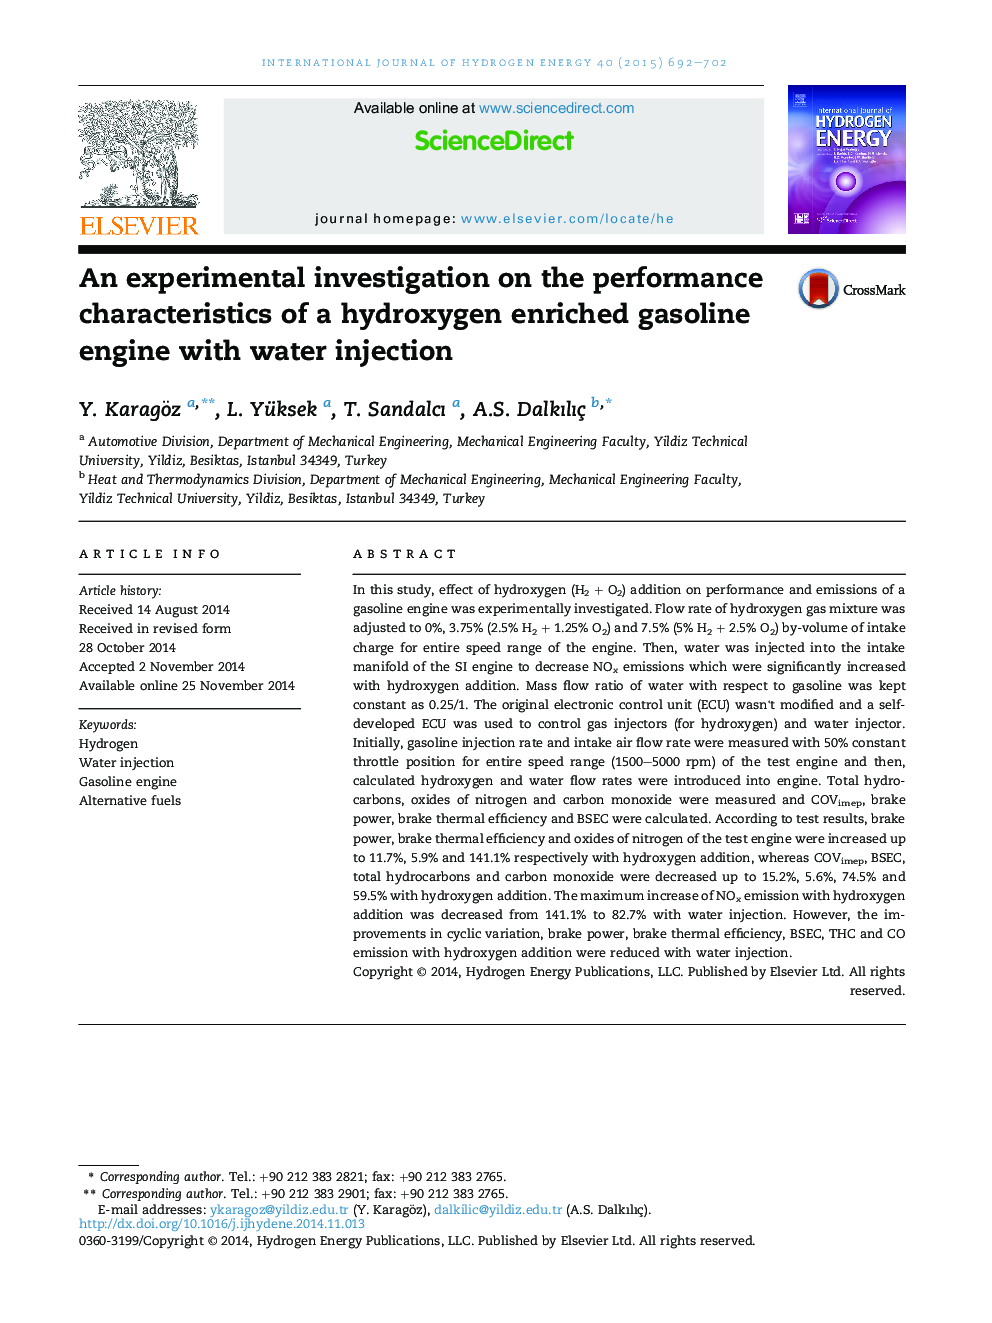 An experimental investigation on the performance characteristics of a hydroxygen enriched gasoline engine with water injection